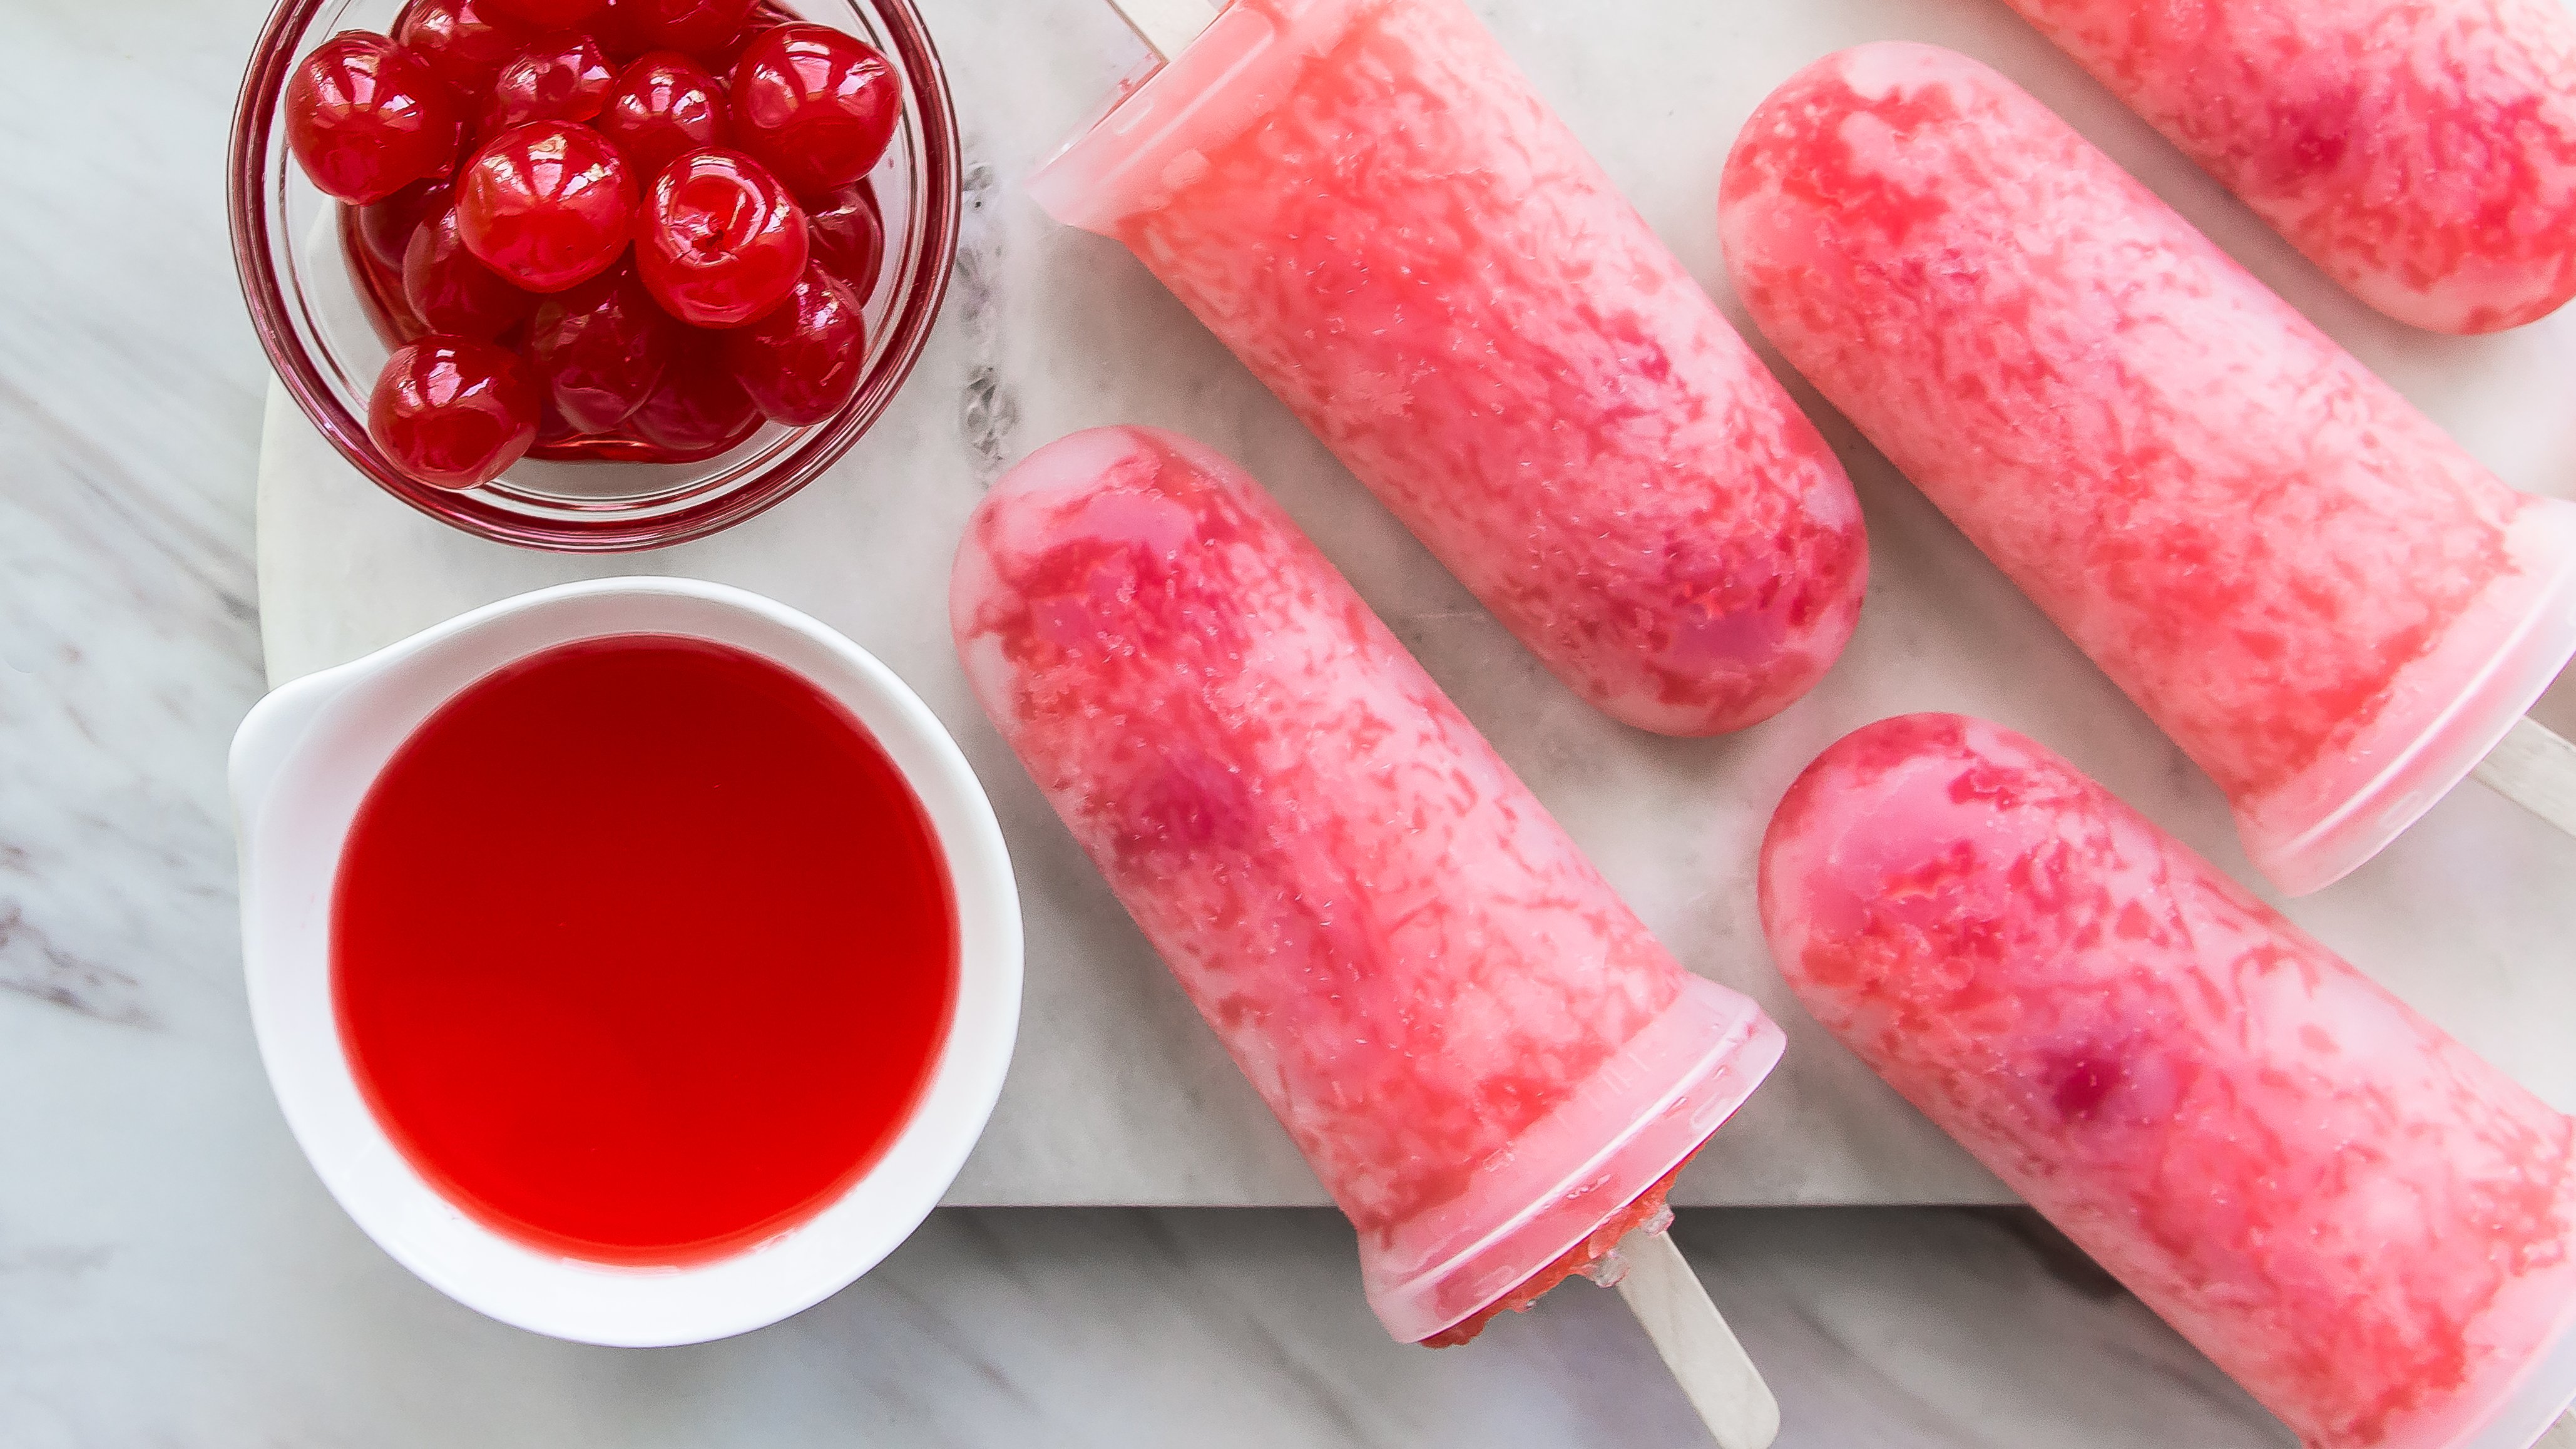 May - Shirley Temple Popsicles 16x9 (1 of 1)